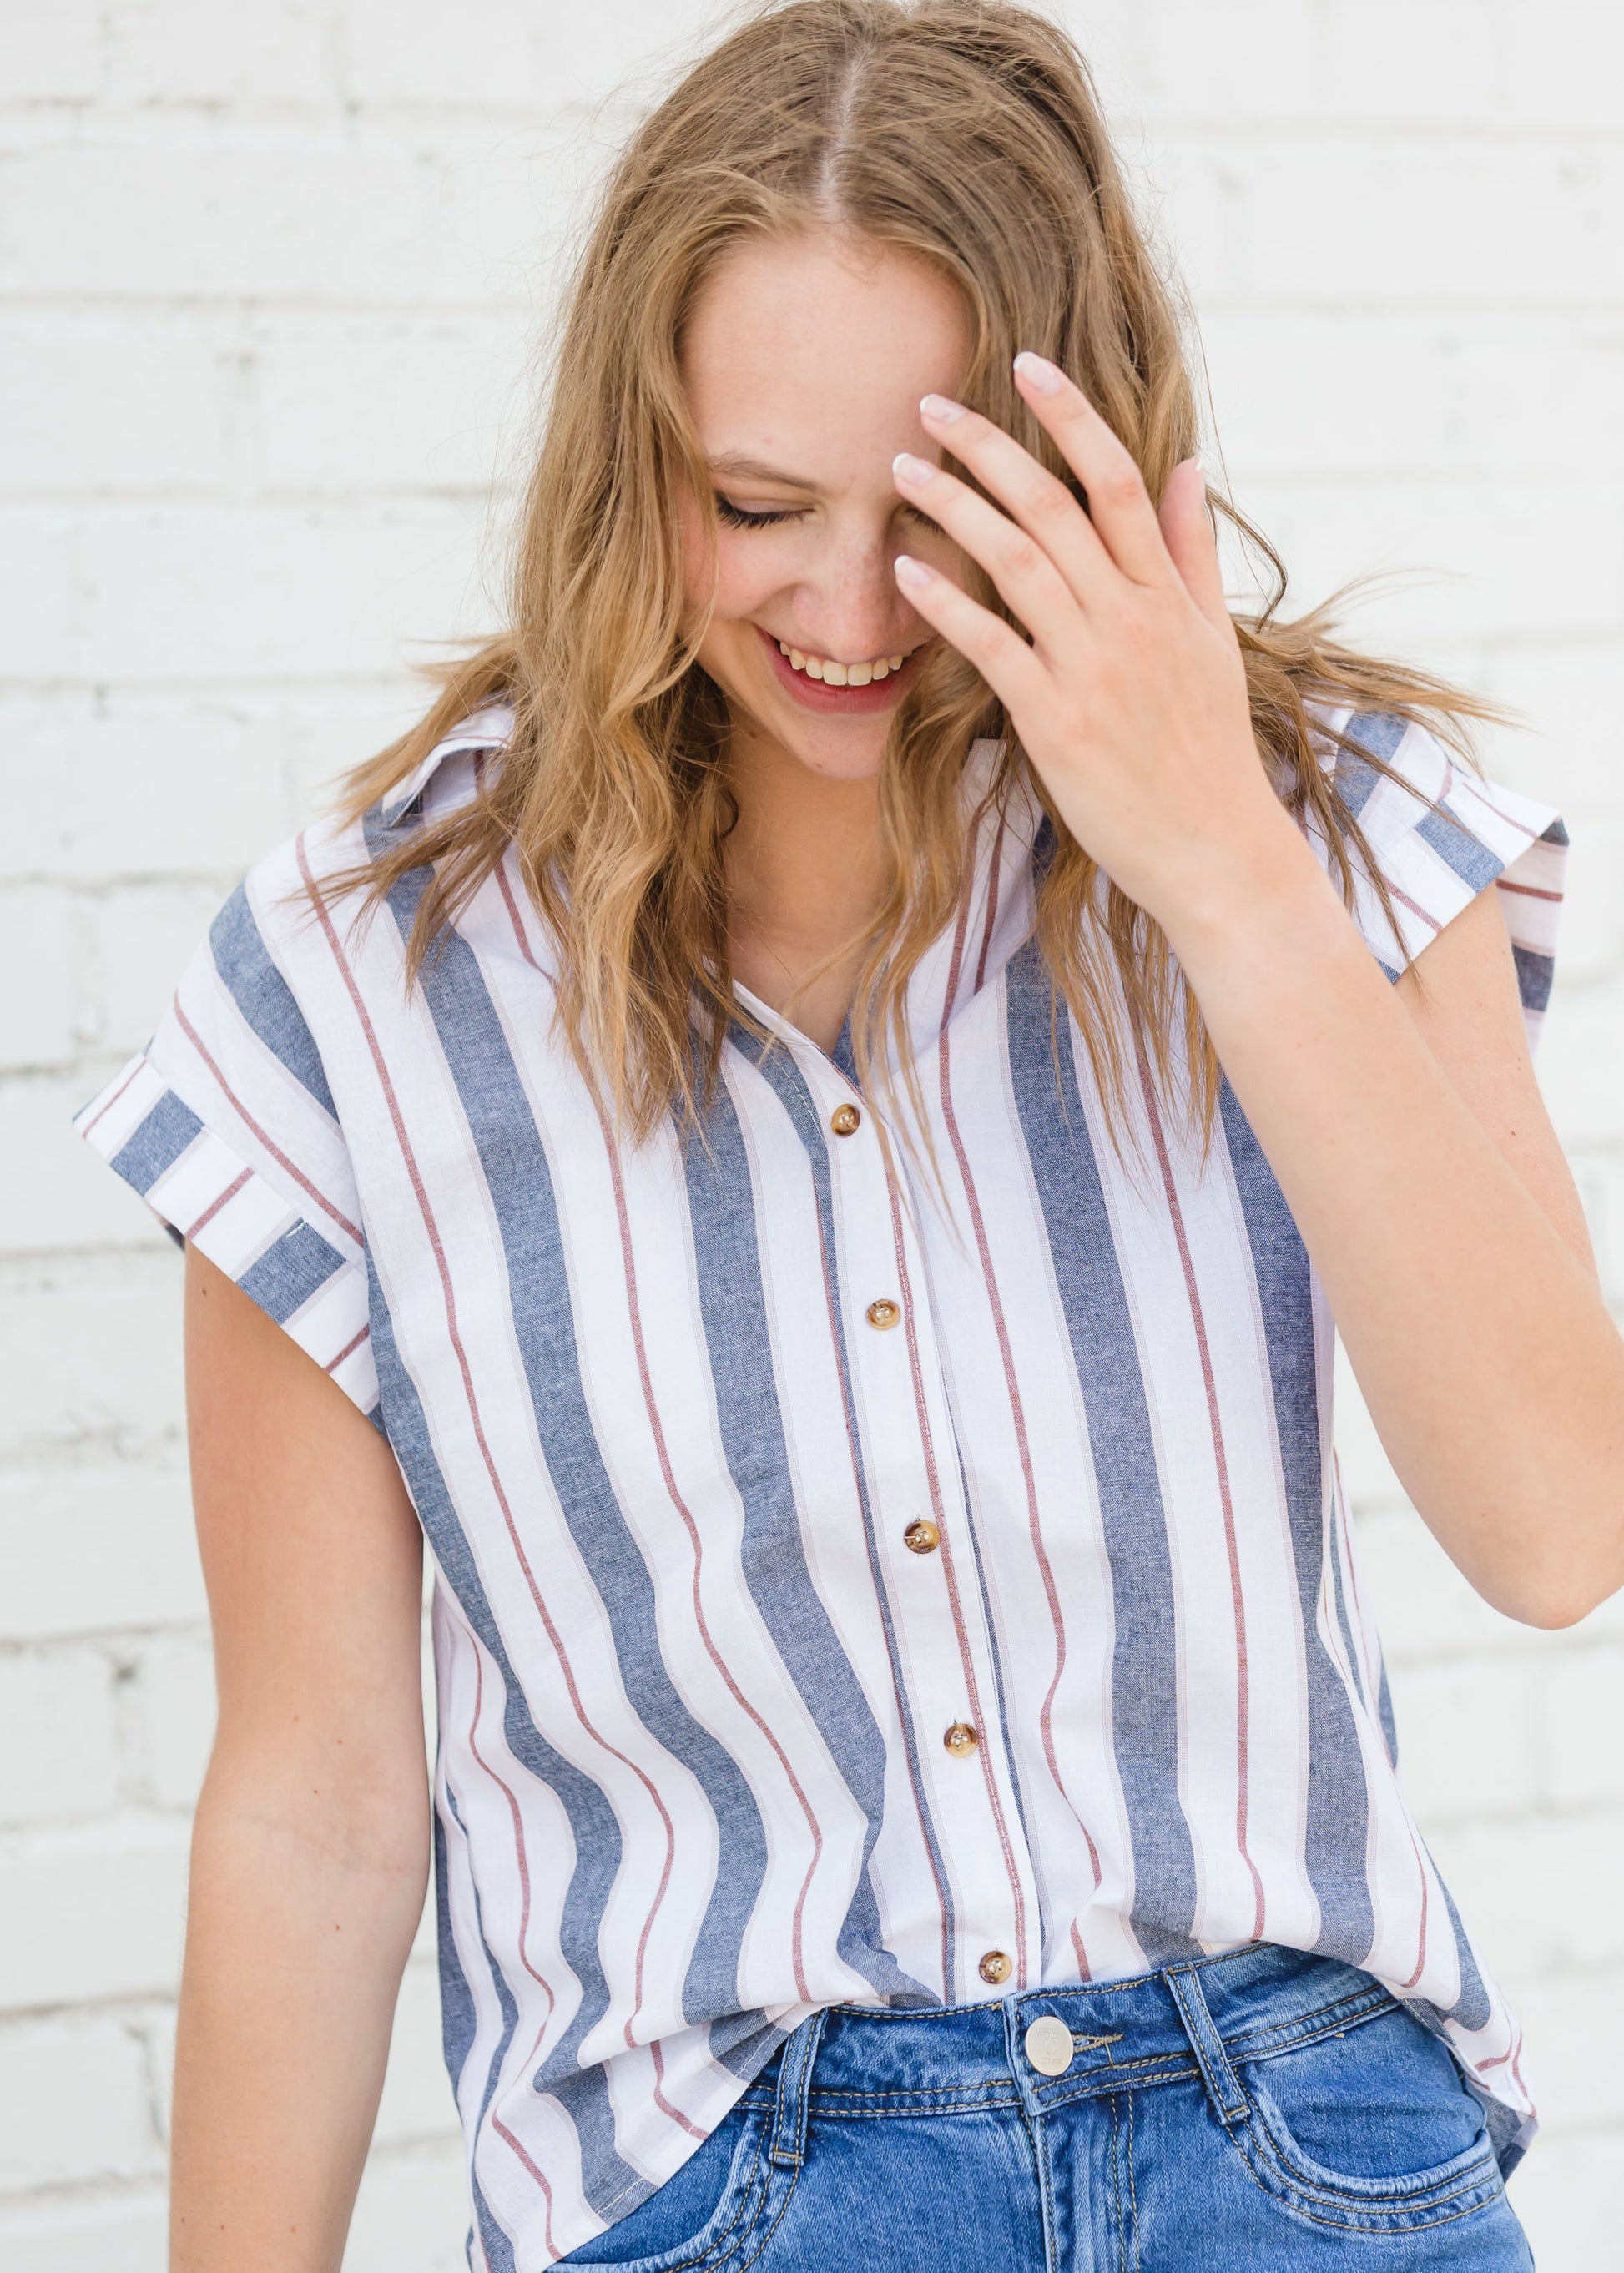 Navy and White Striped Tee - FINAL SALE Tops